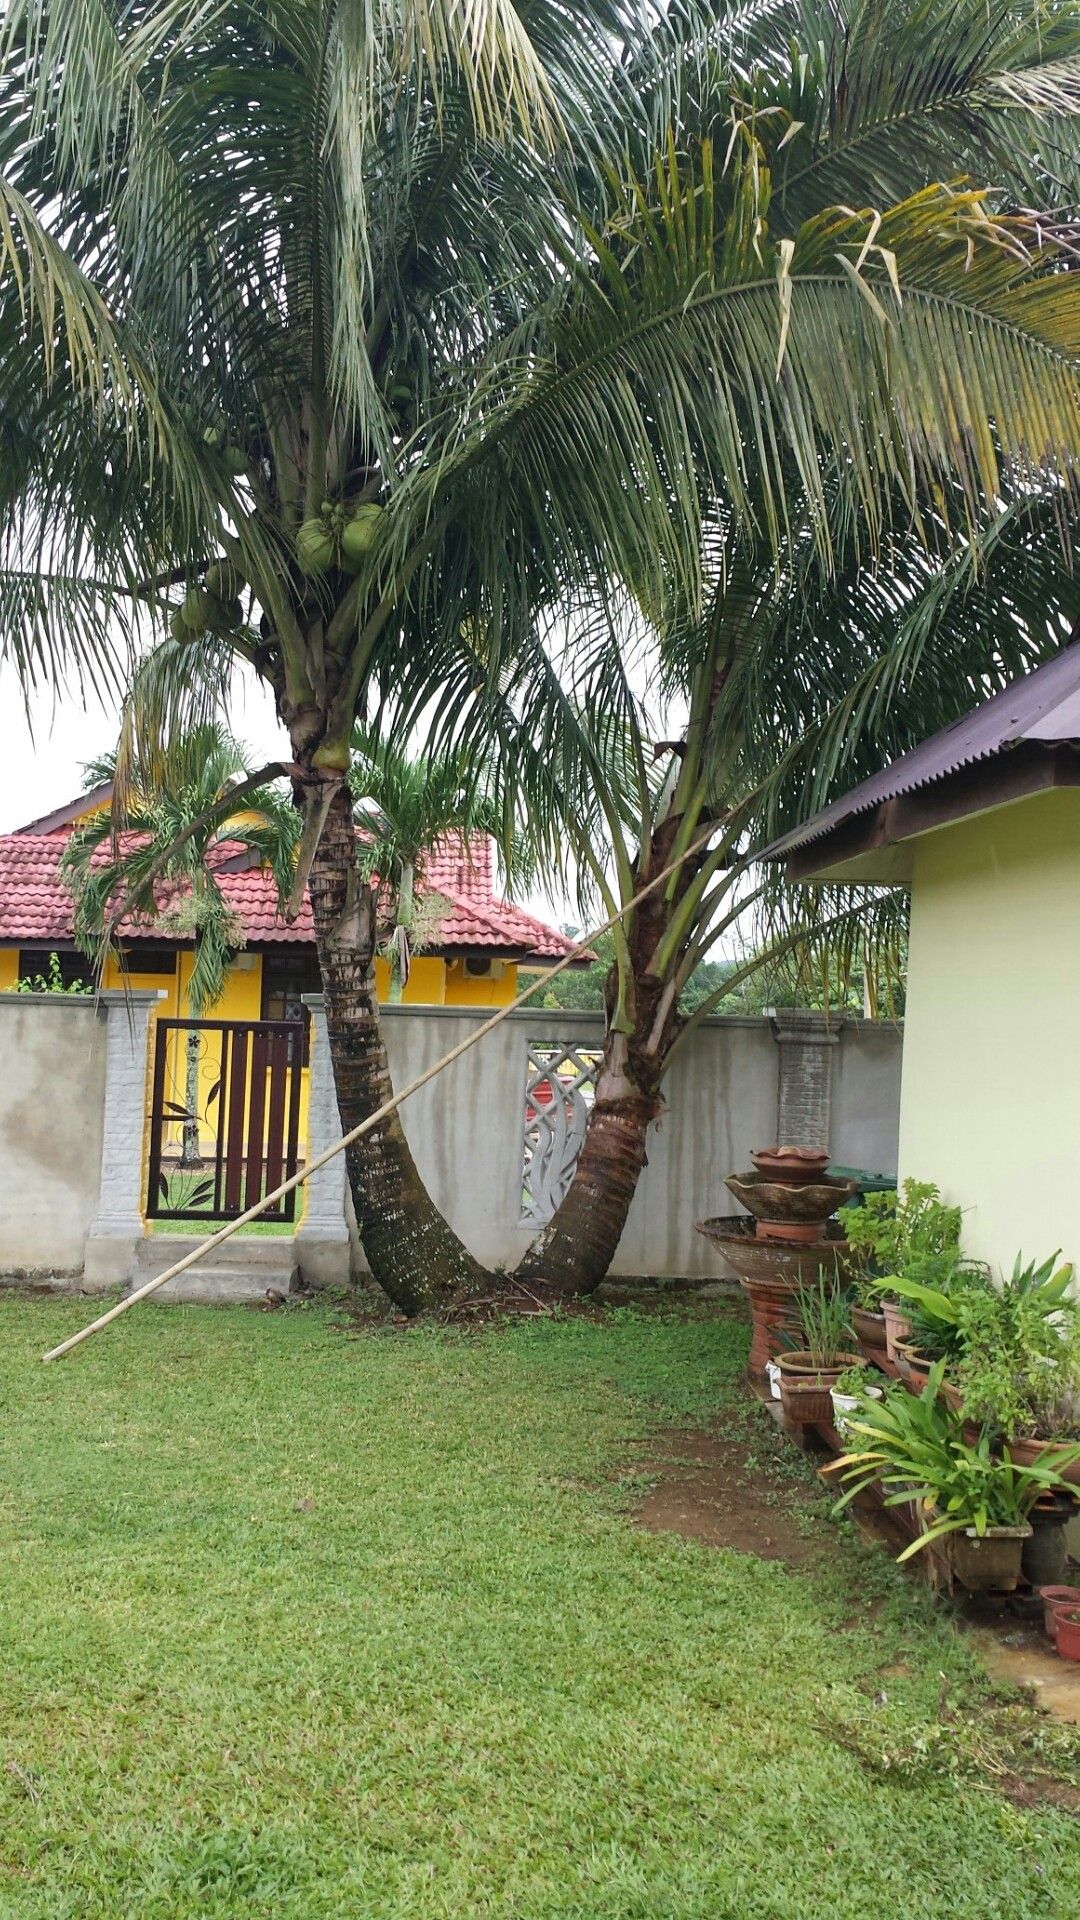 Planting Coconut Trees on Either Side